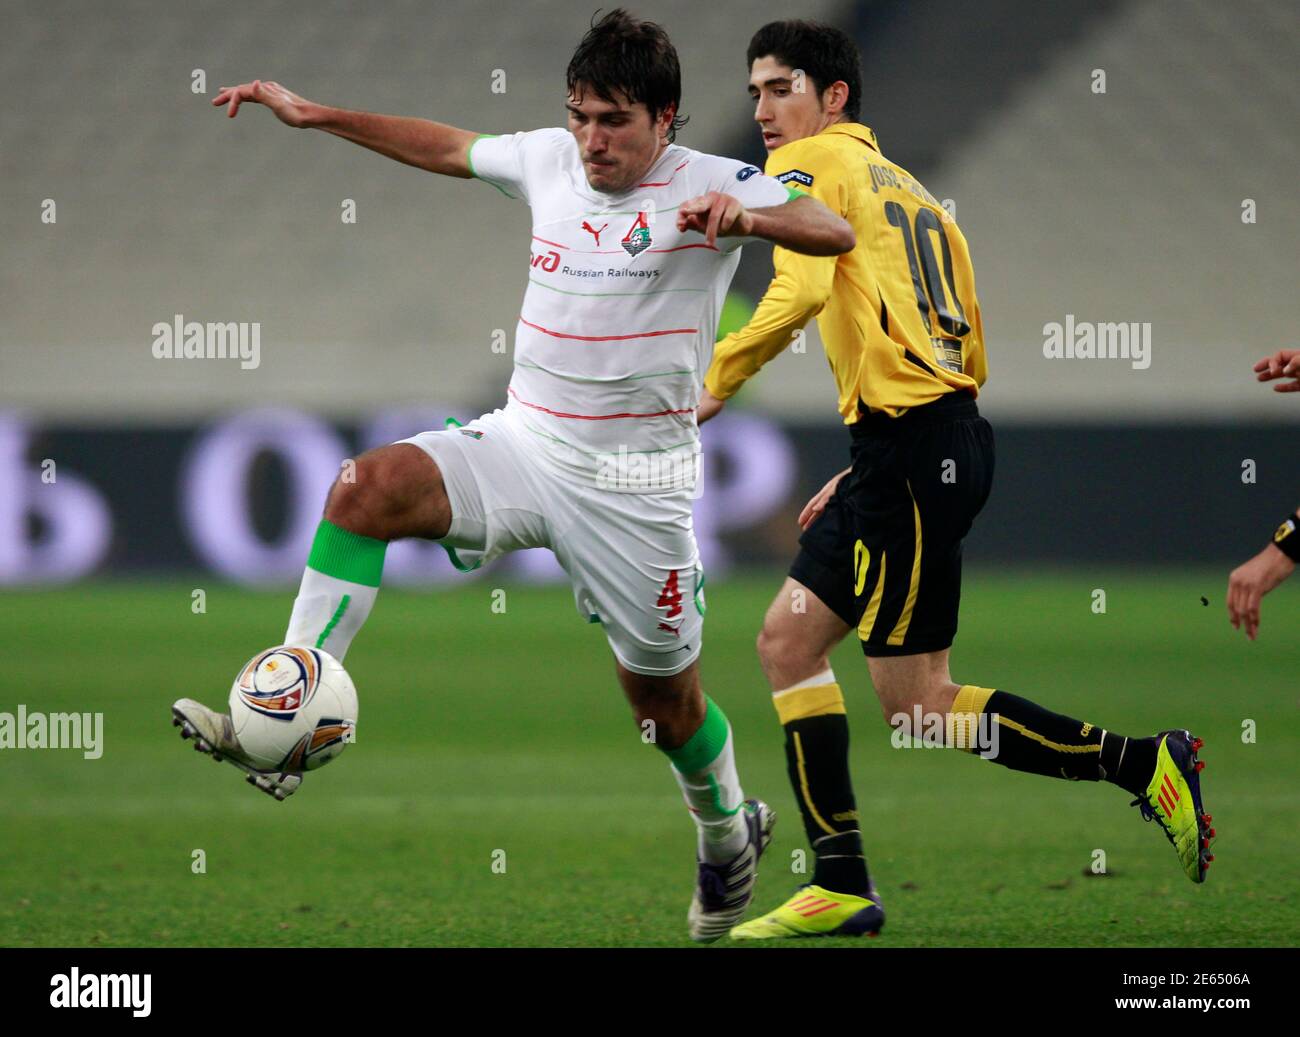 Lokomotiv Moscow's Alberto Zapater (L) controls the ball in front of AEK  Athens' Jose Carlos during their Europa League Group L soccer match at  Olympic stadium in Athens November 3, 2011. REUTERS/John